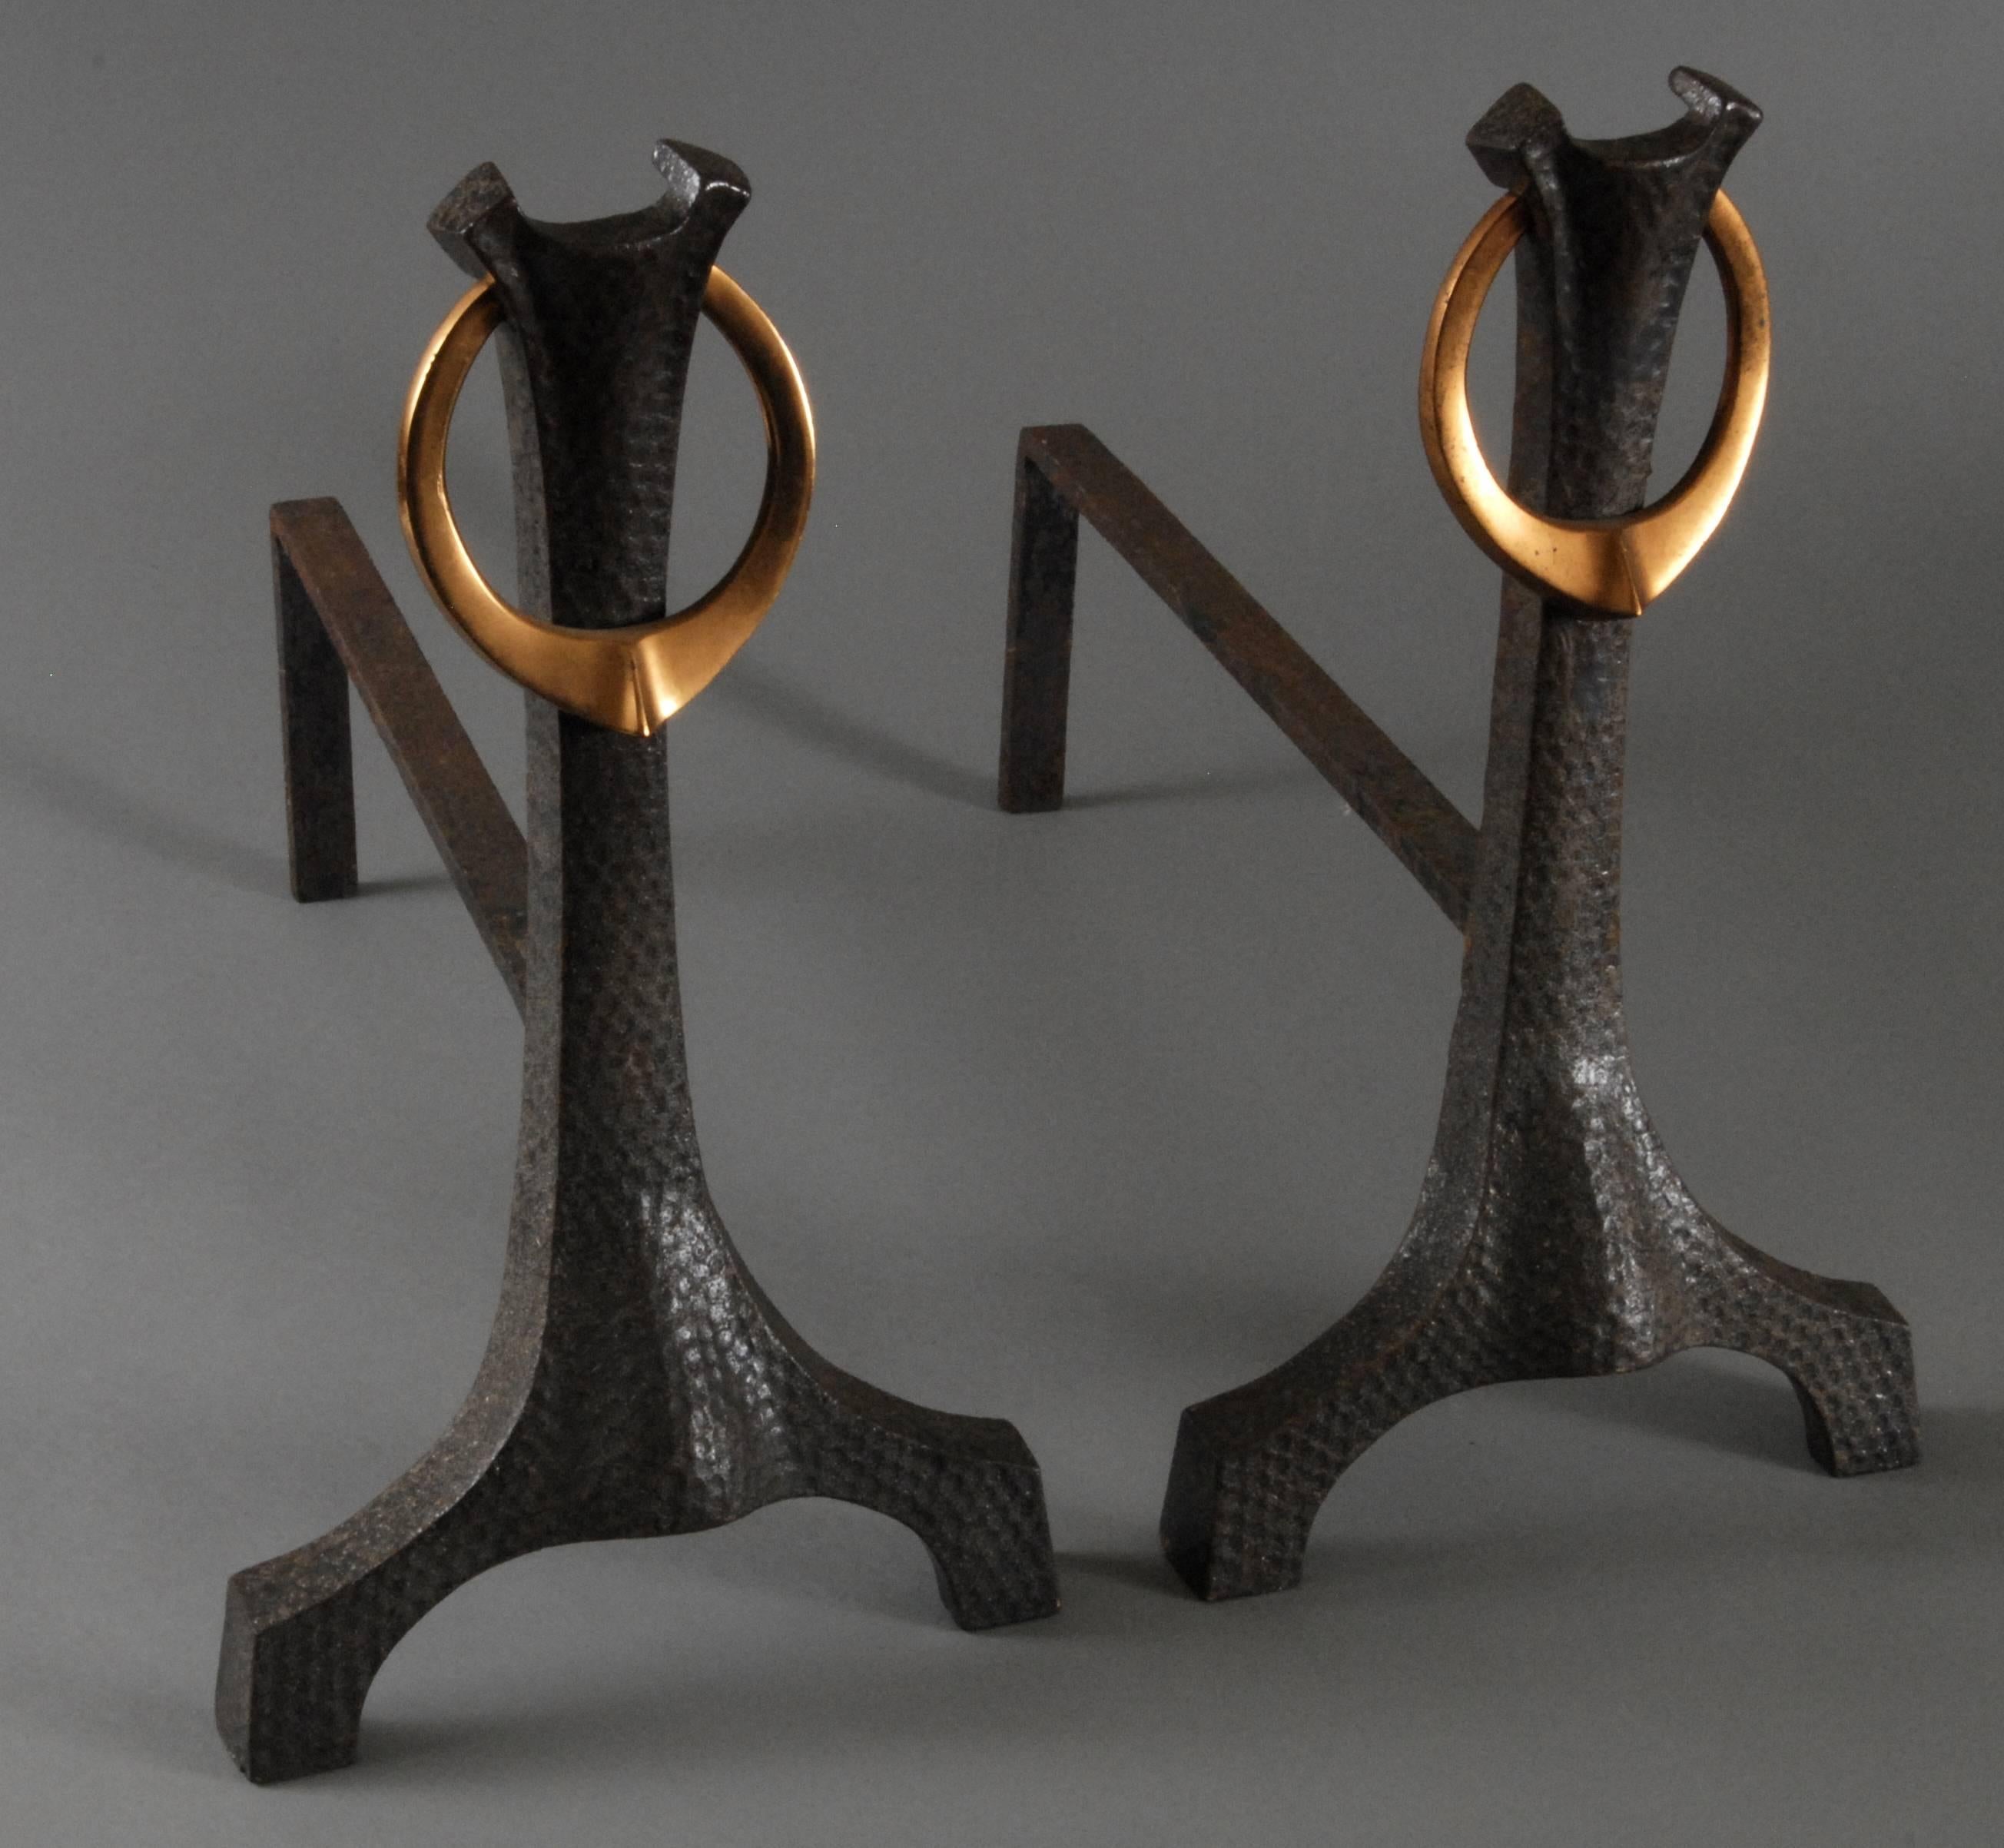 Hand-Crafted Pair of Andirons or Firedogs, Copper and Iron, English, circa 1905